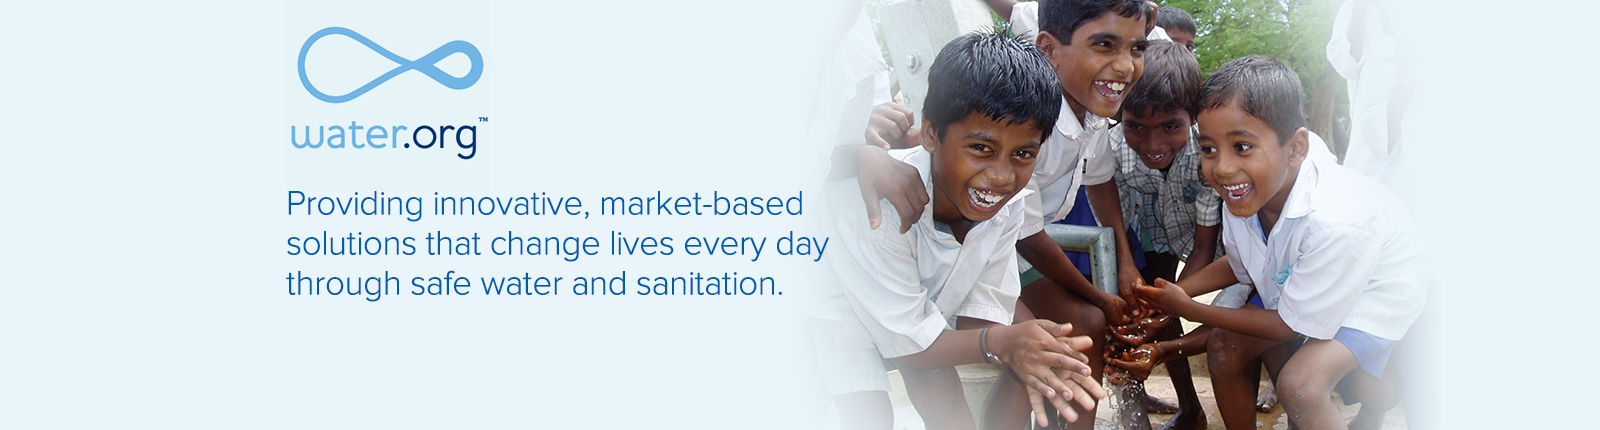 water.org Providing innovative, market-based solutions that change lives every day through safe water and sanitation.